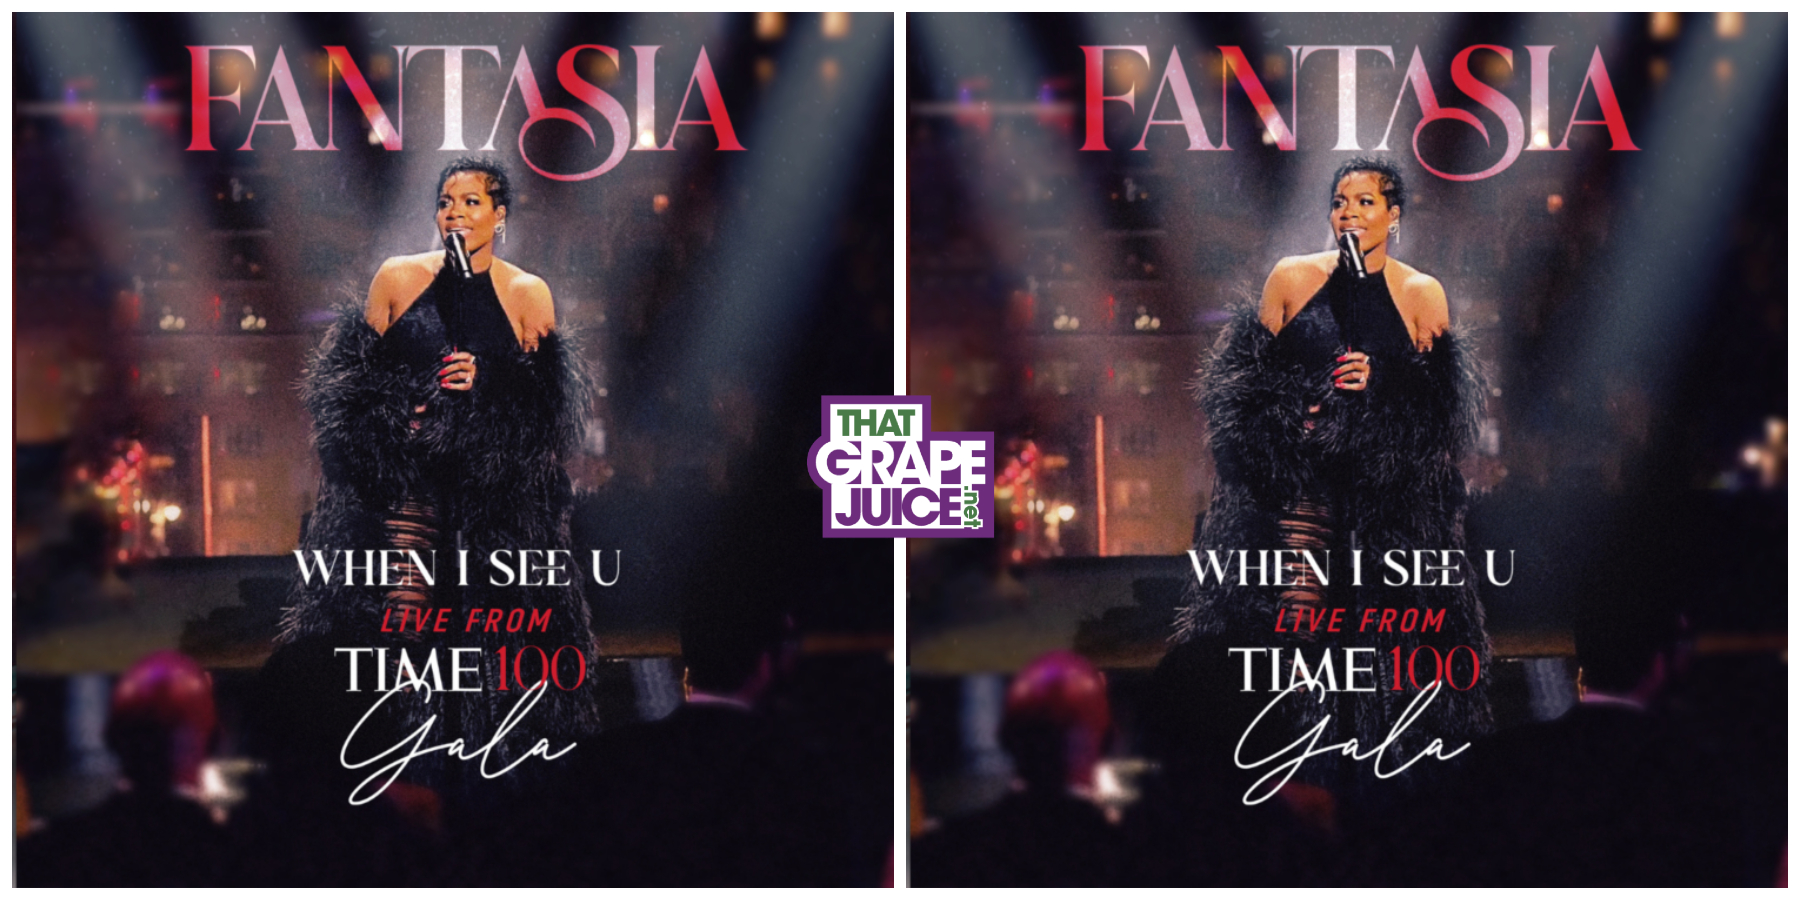 Listen: Fantasia Wide Releases Live Recording of ‘When I See U’ from the Time 100 Gala on Streaming Services